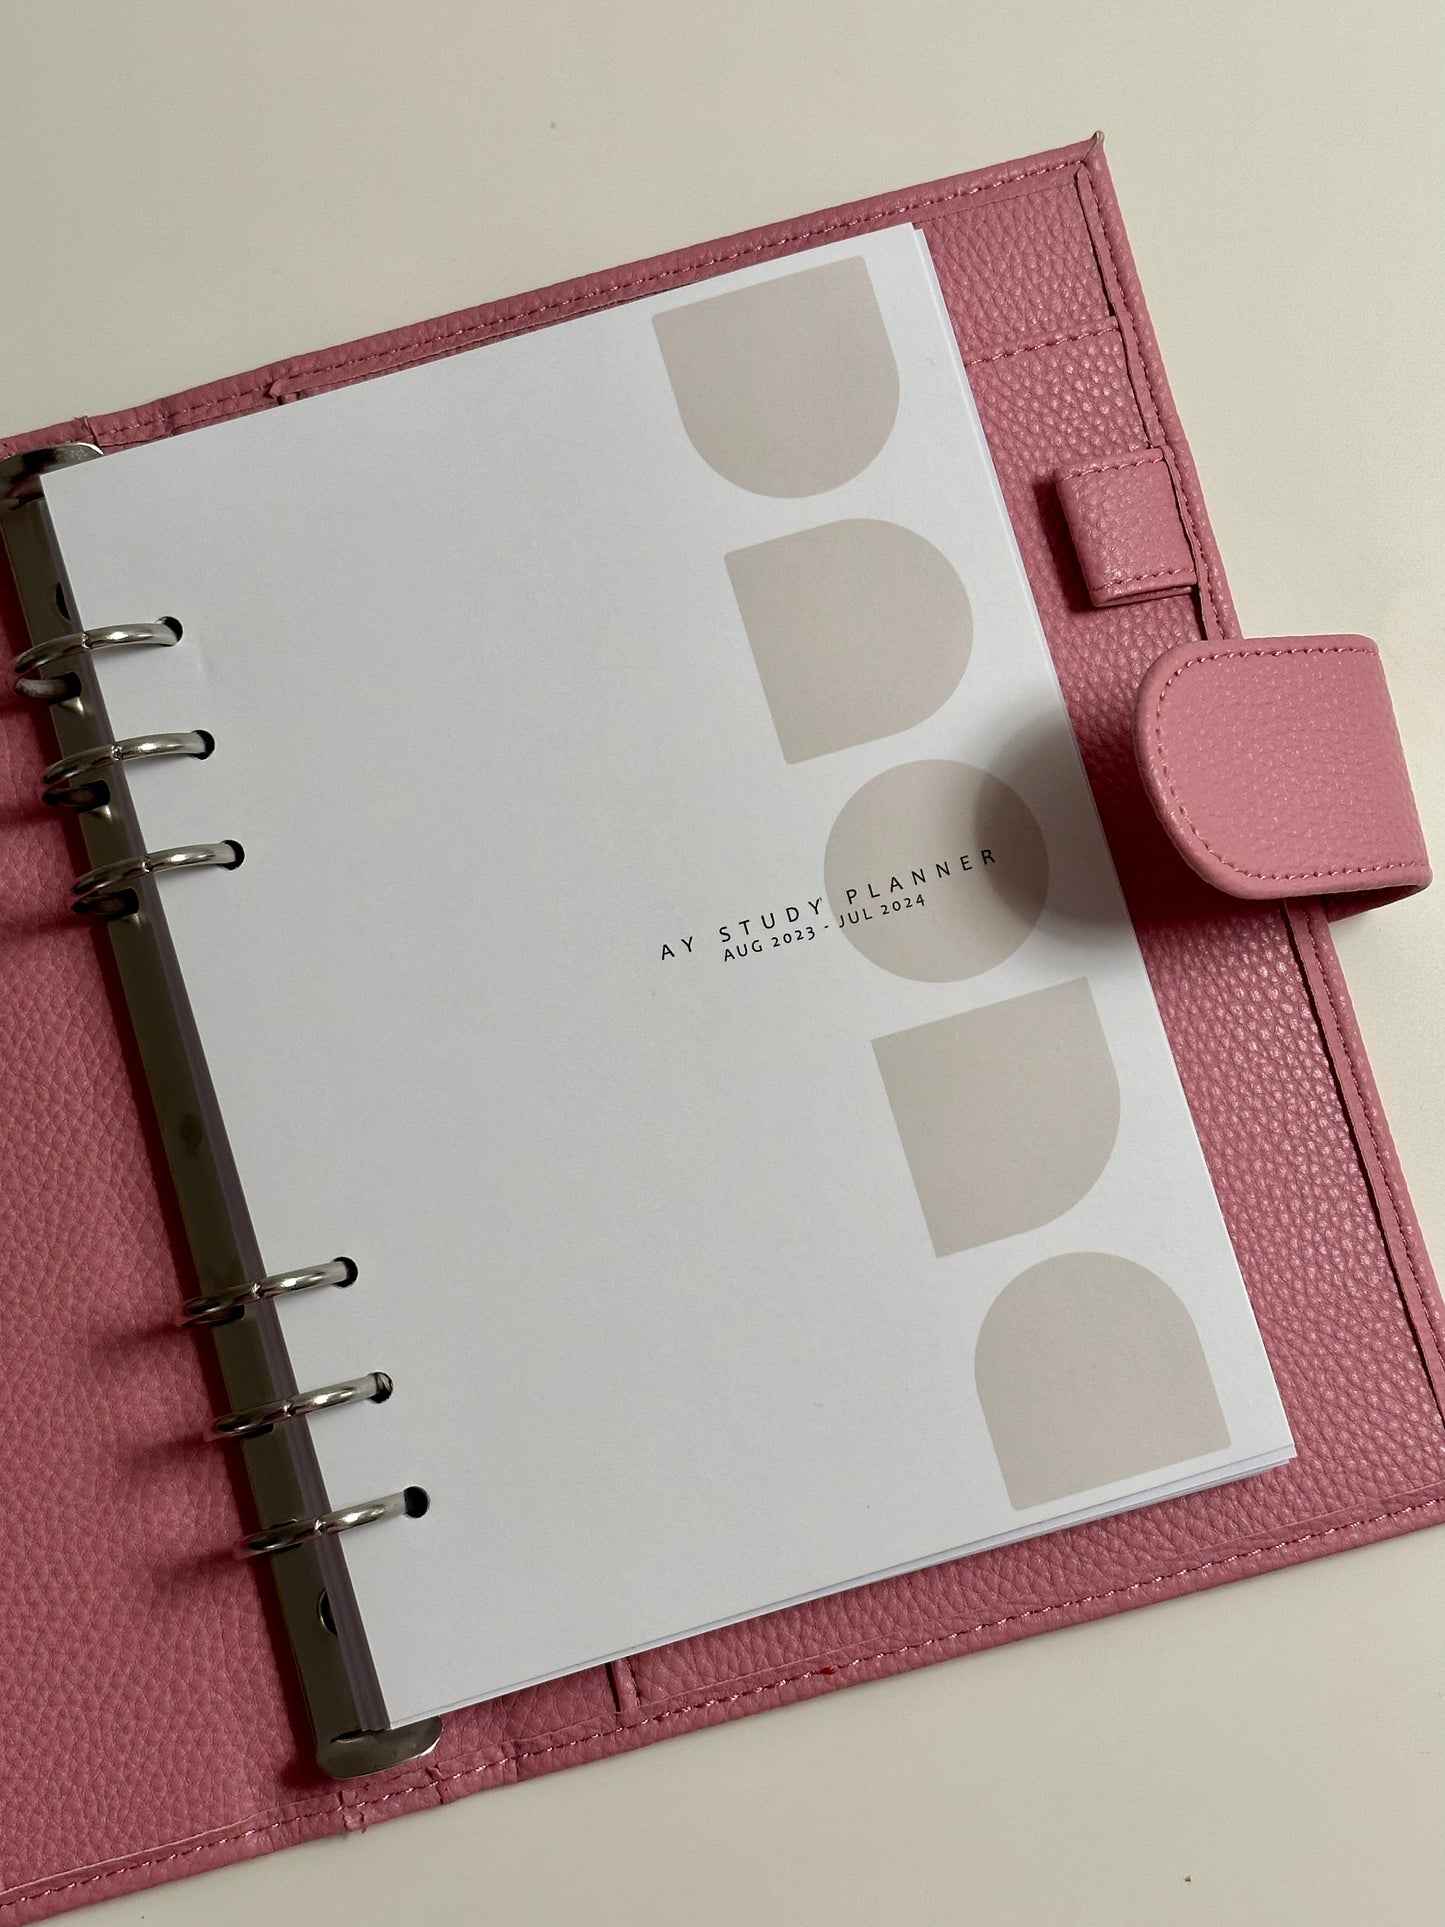 Study Planner with leather cover